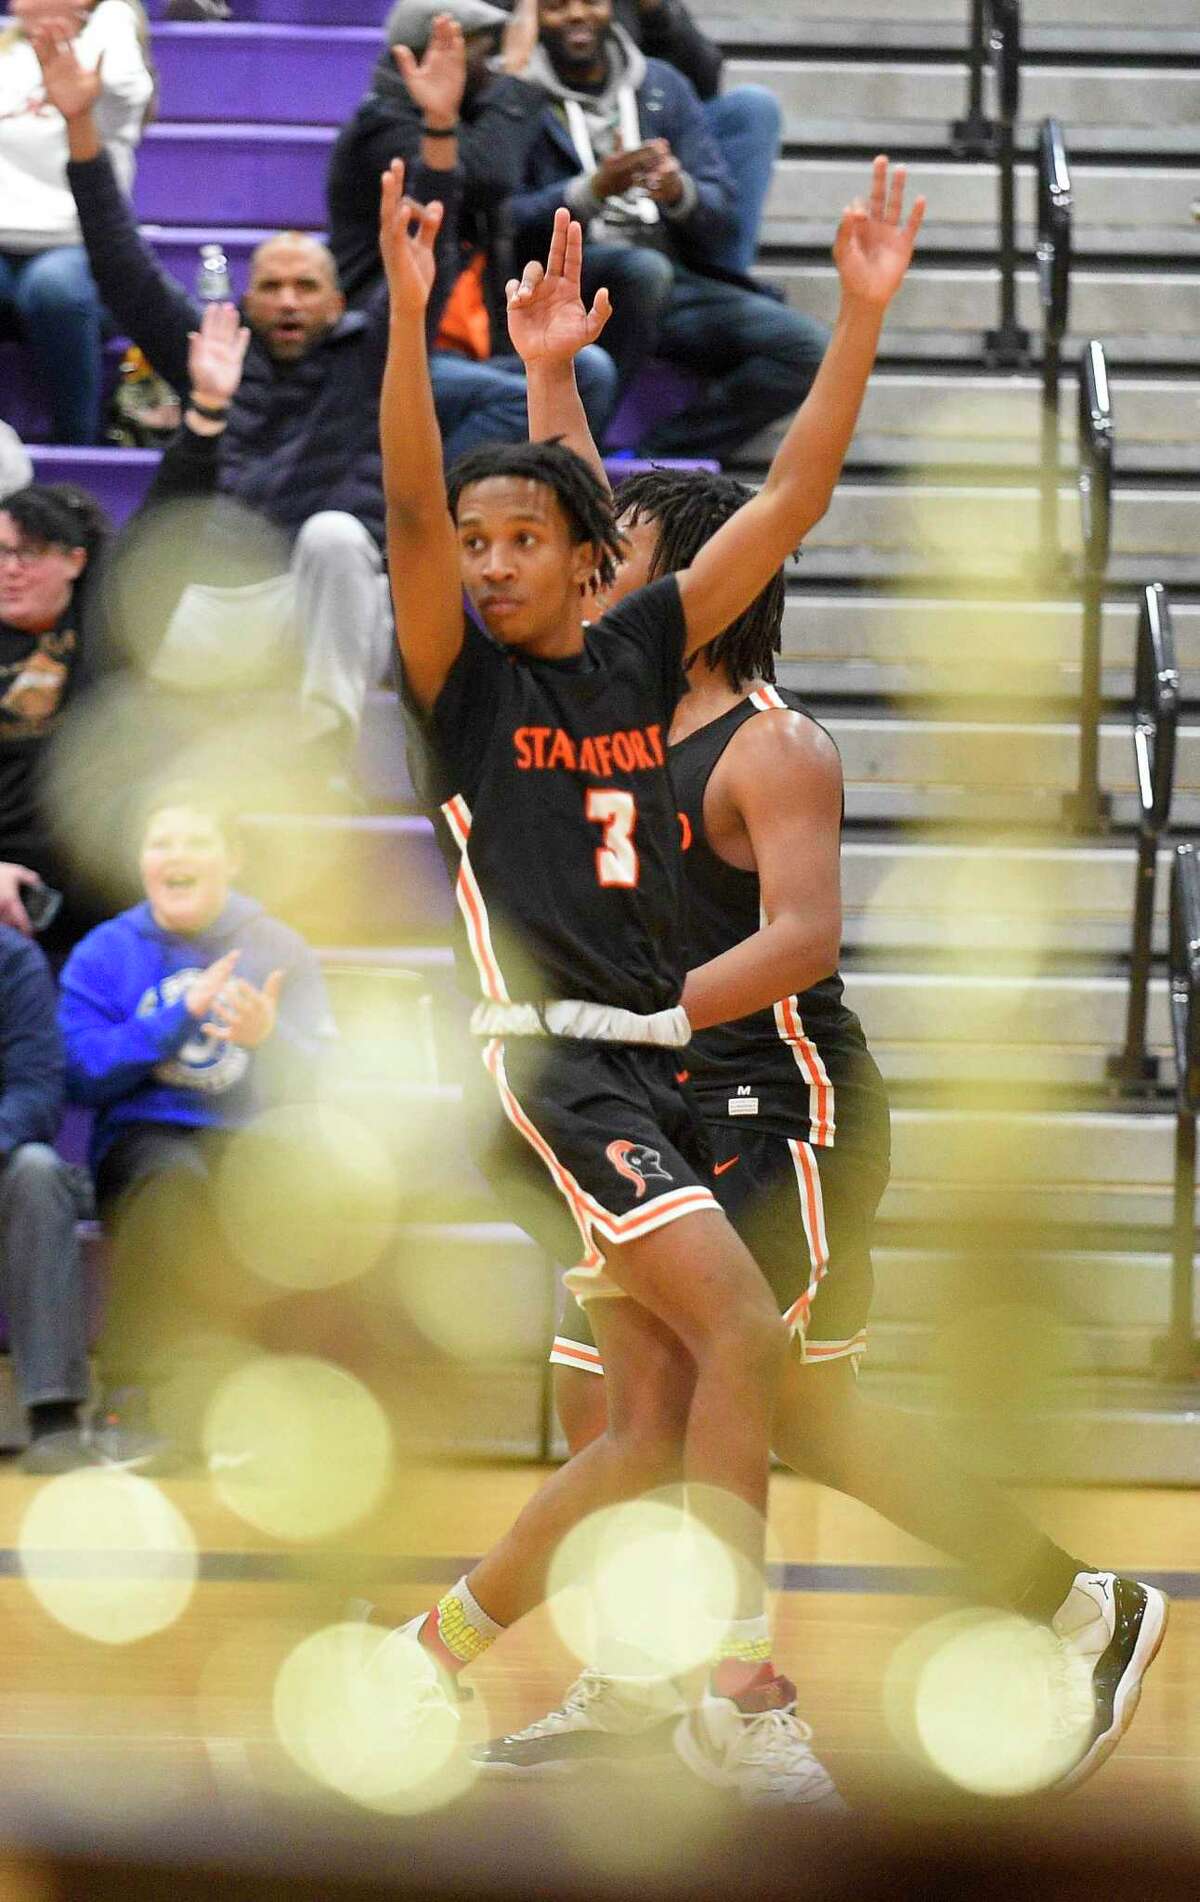 Stamford's Damani Taylor (3) celebrates his fade away three pointer in the third quarter against Westhill in a boys basketball game of the MLK Classic Basketball Tournament at Westhill High School in Stamford, Conn. on Feb. 1, 2020. Taylor shot, the turning point and go ahead basket helped Stamford defeat Westhill 57-51.